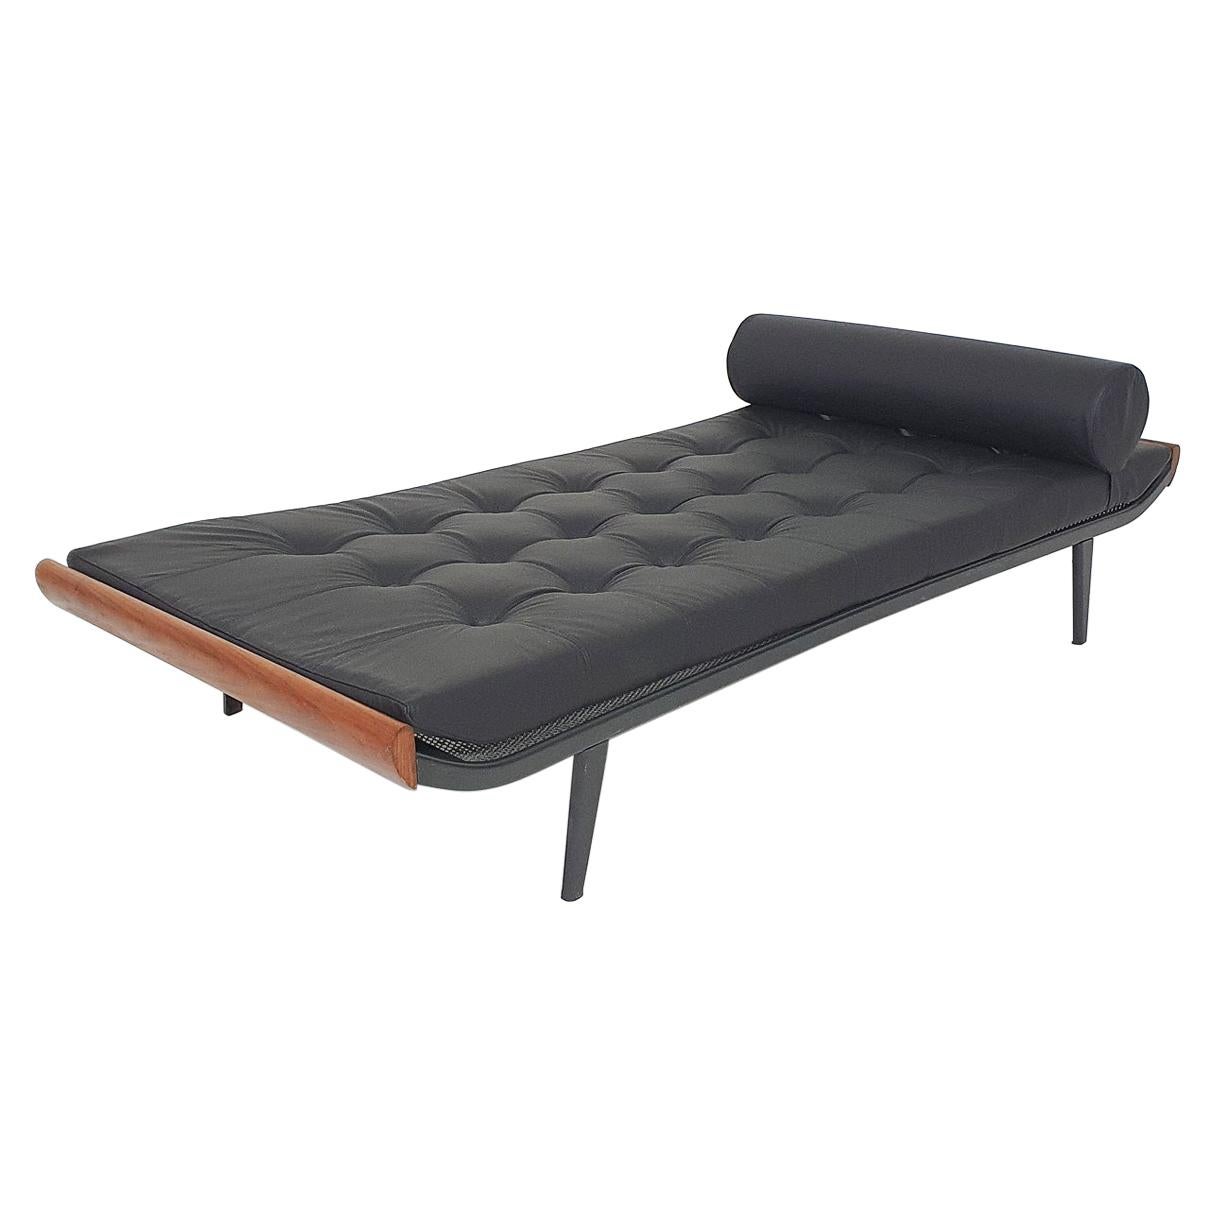 Black Leather A.R. Cordemeyer for Auping “Cleopatra” Daybed The Netherlands 1953